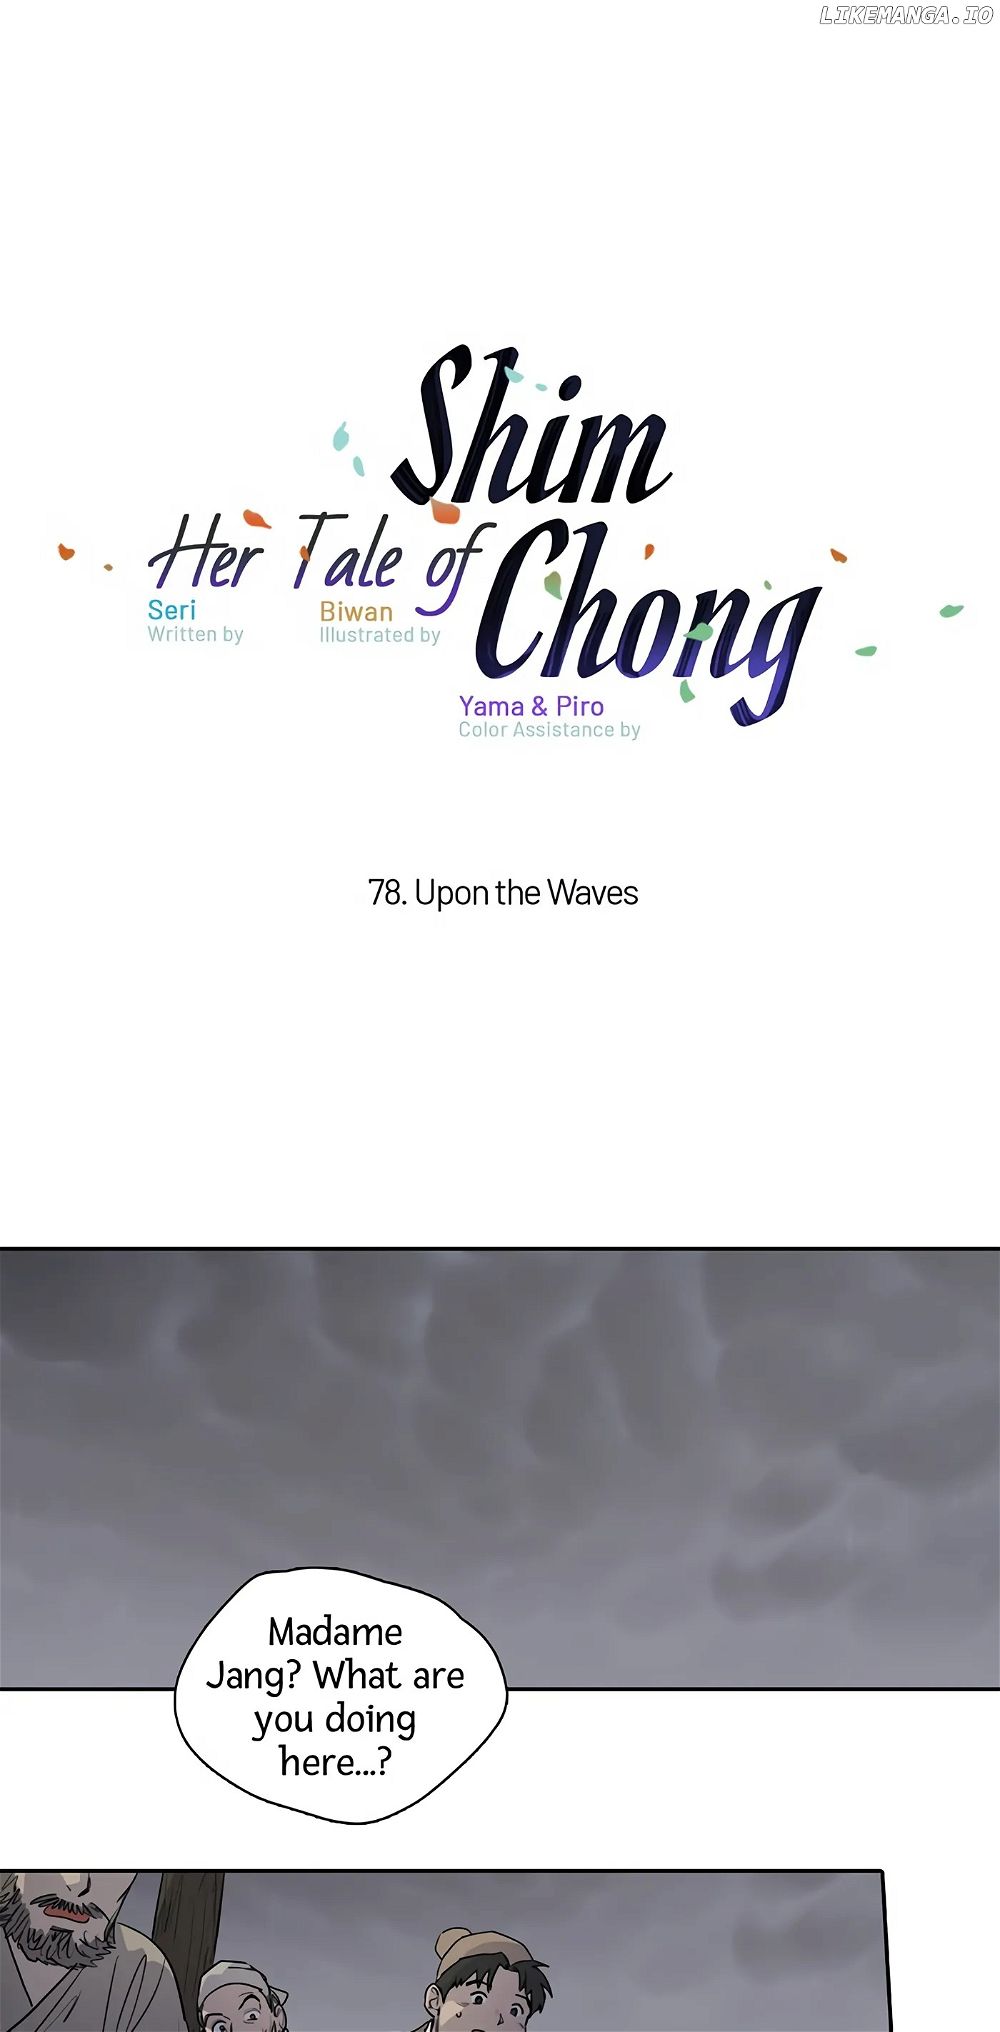 Her Tale of Shim Chong Chapter 78 - Page 1